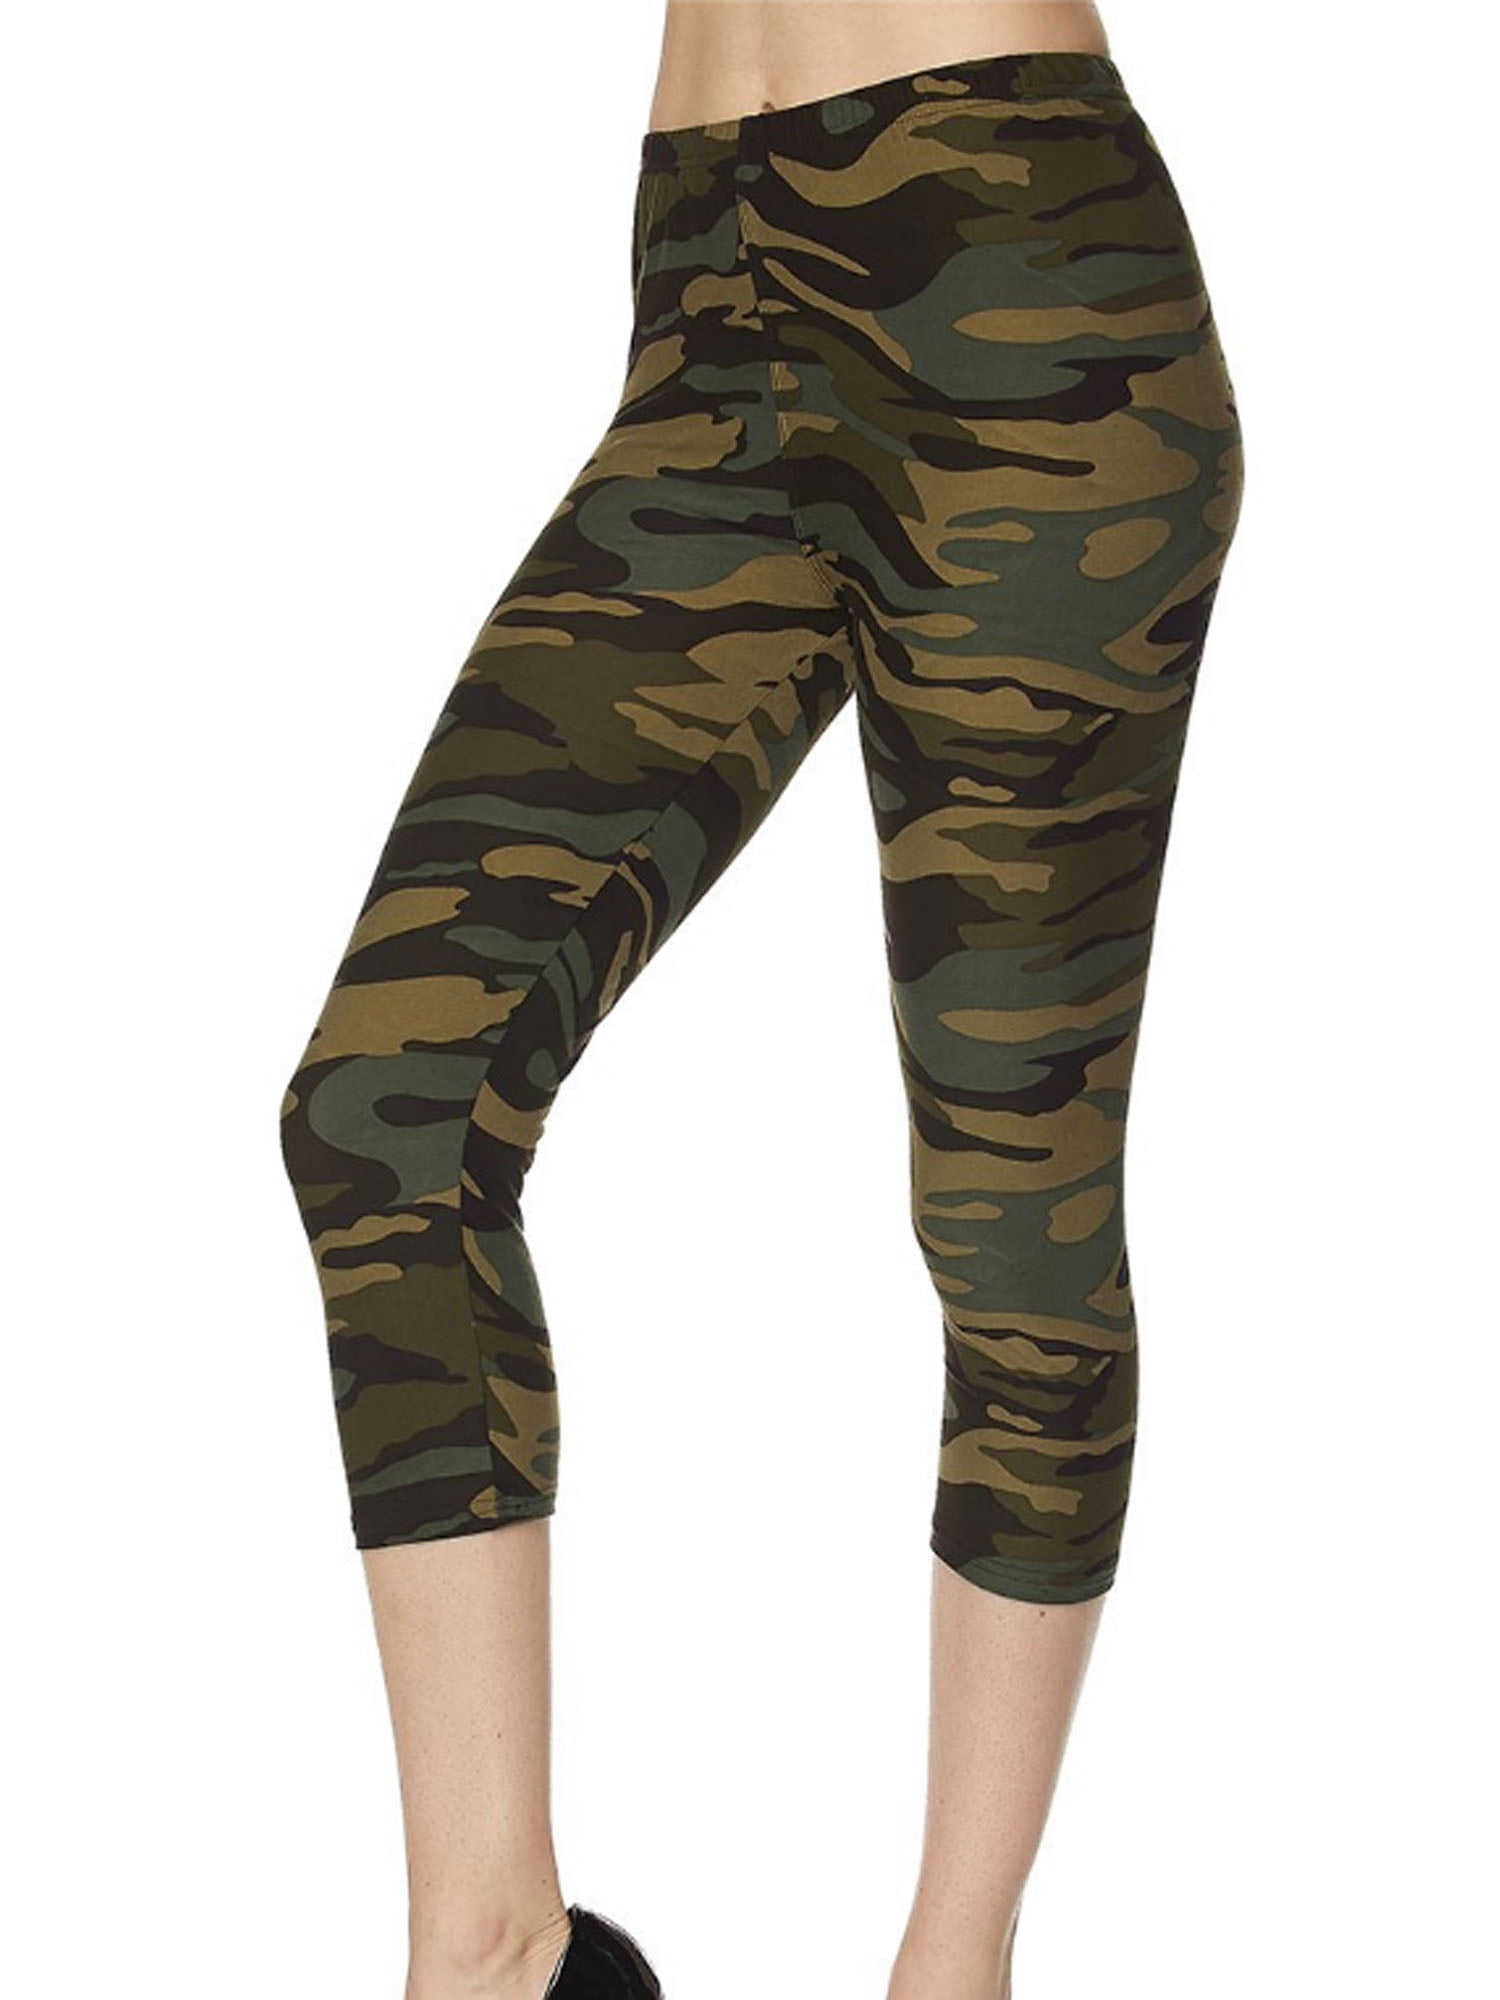 Women's Camouflage Print Camo Ymmy Brushed Capri Leggings For Yoga and ...